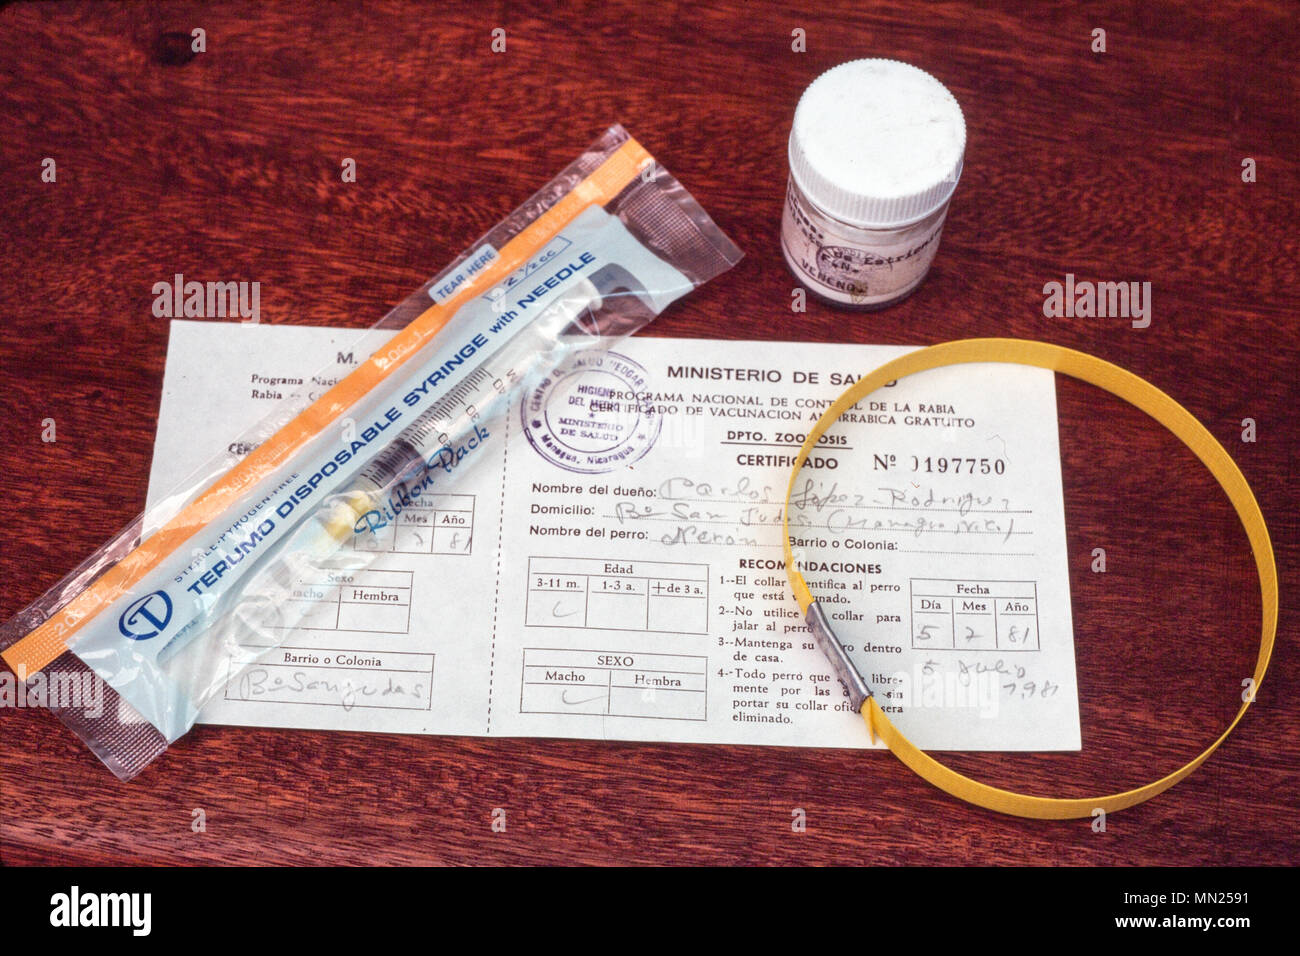 Managua, Nicaragua, July 1981; A Ministry of Health document, syringe and medicine for a dog bite. Stock Photo